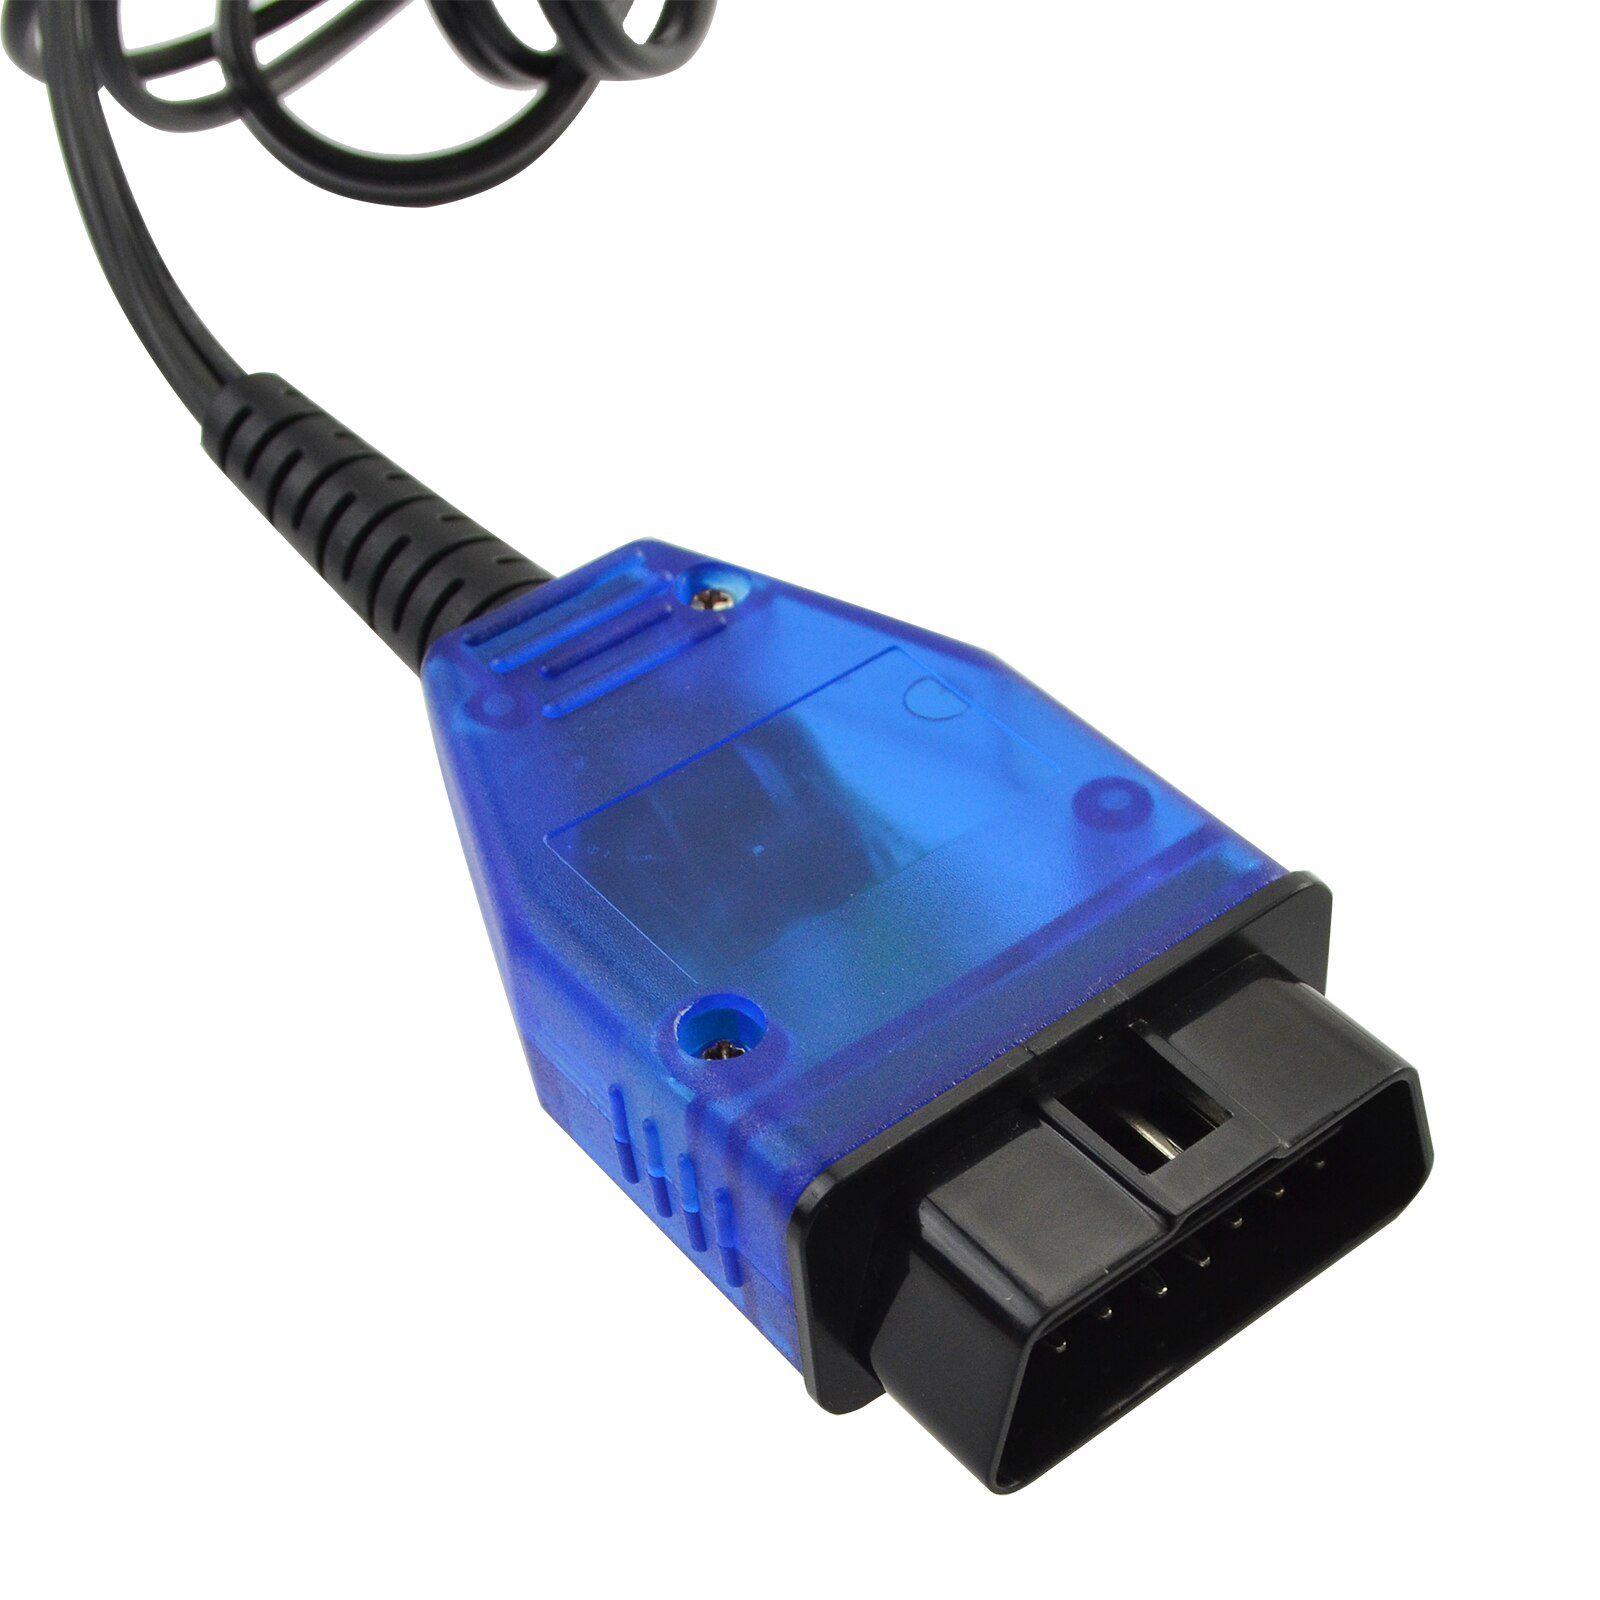 Car Memory Data Saver Automotive Emergency Power Supply Cable Battery Cable OBD II Memory Saver Connector